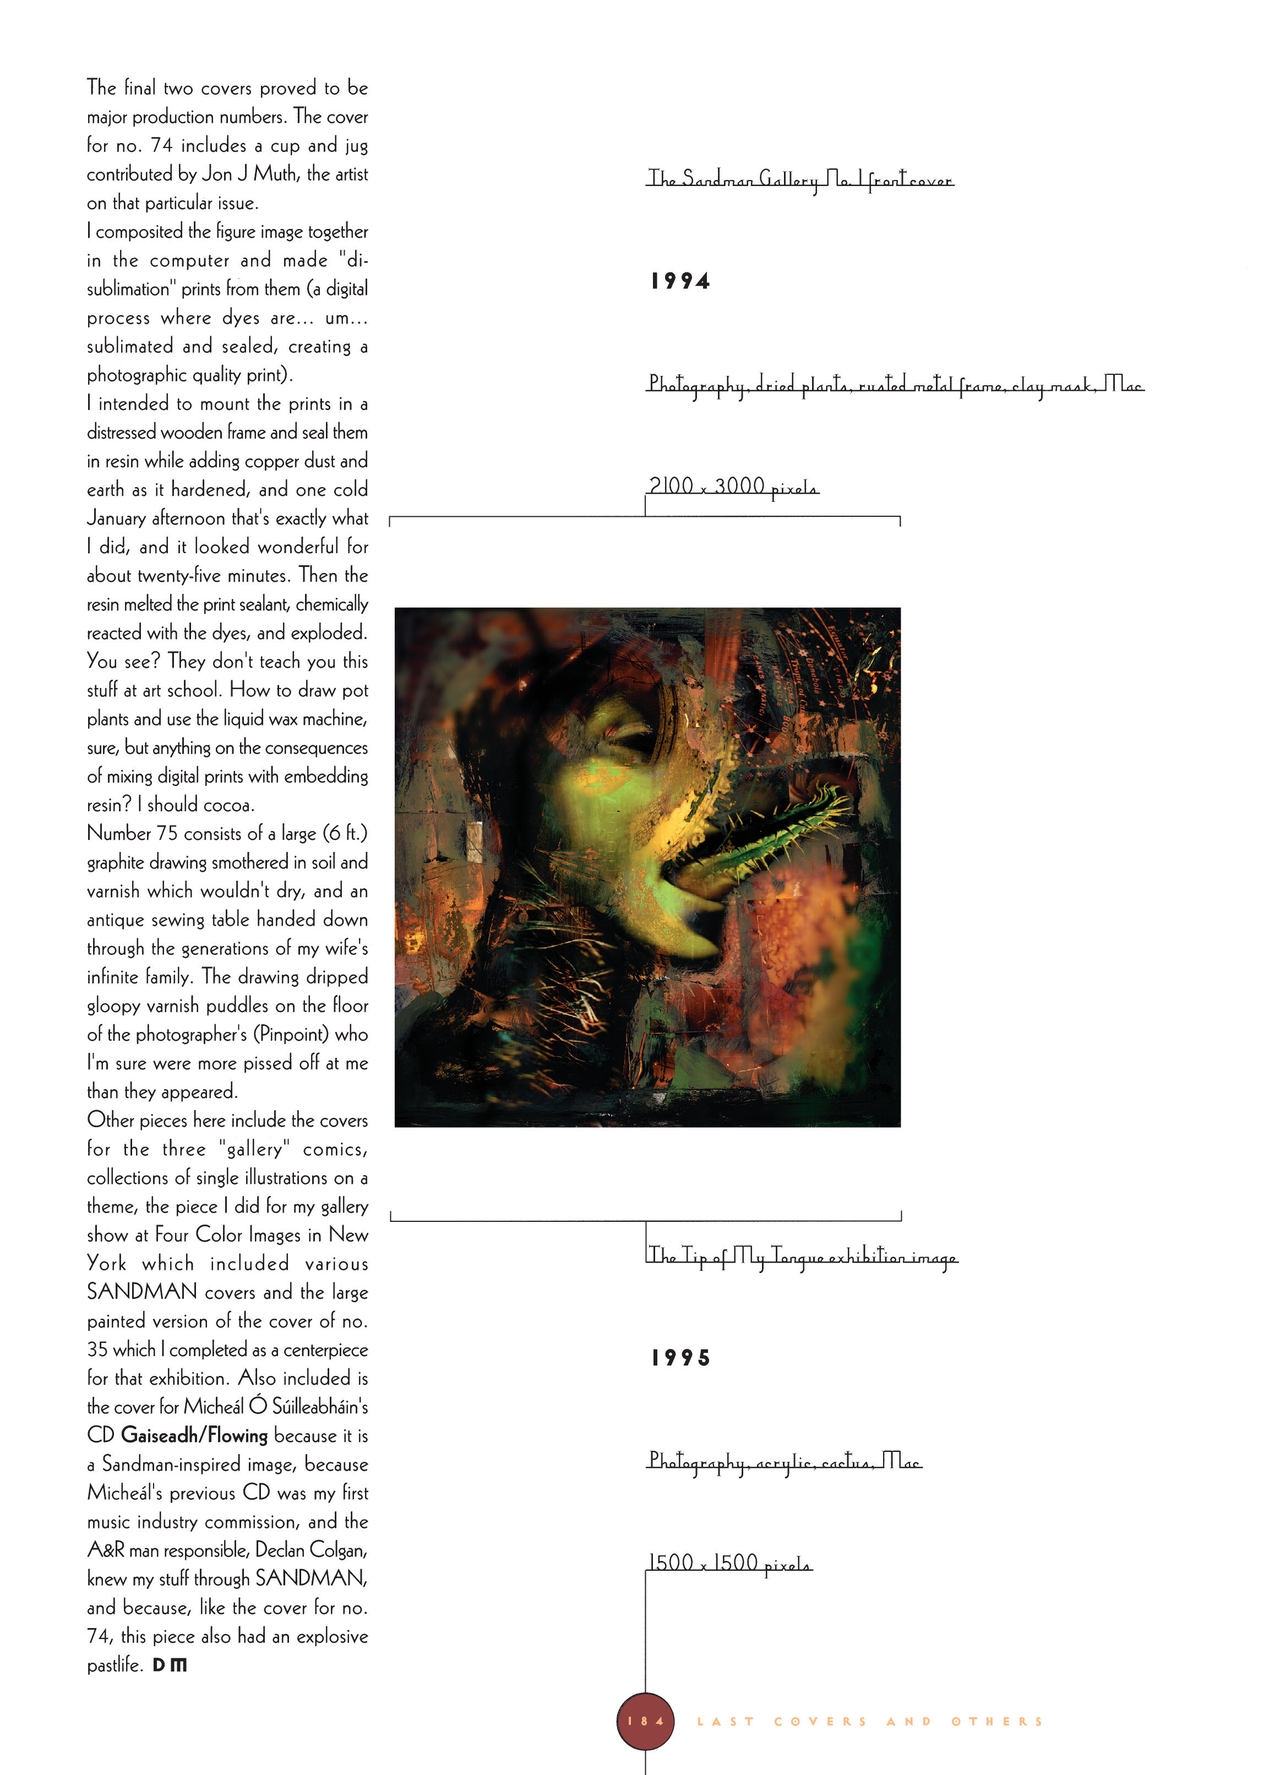 [Dave McKean] Dust Covers - The Collected Sandman Covers 1989-1997 ]Digital] 182